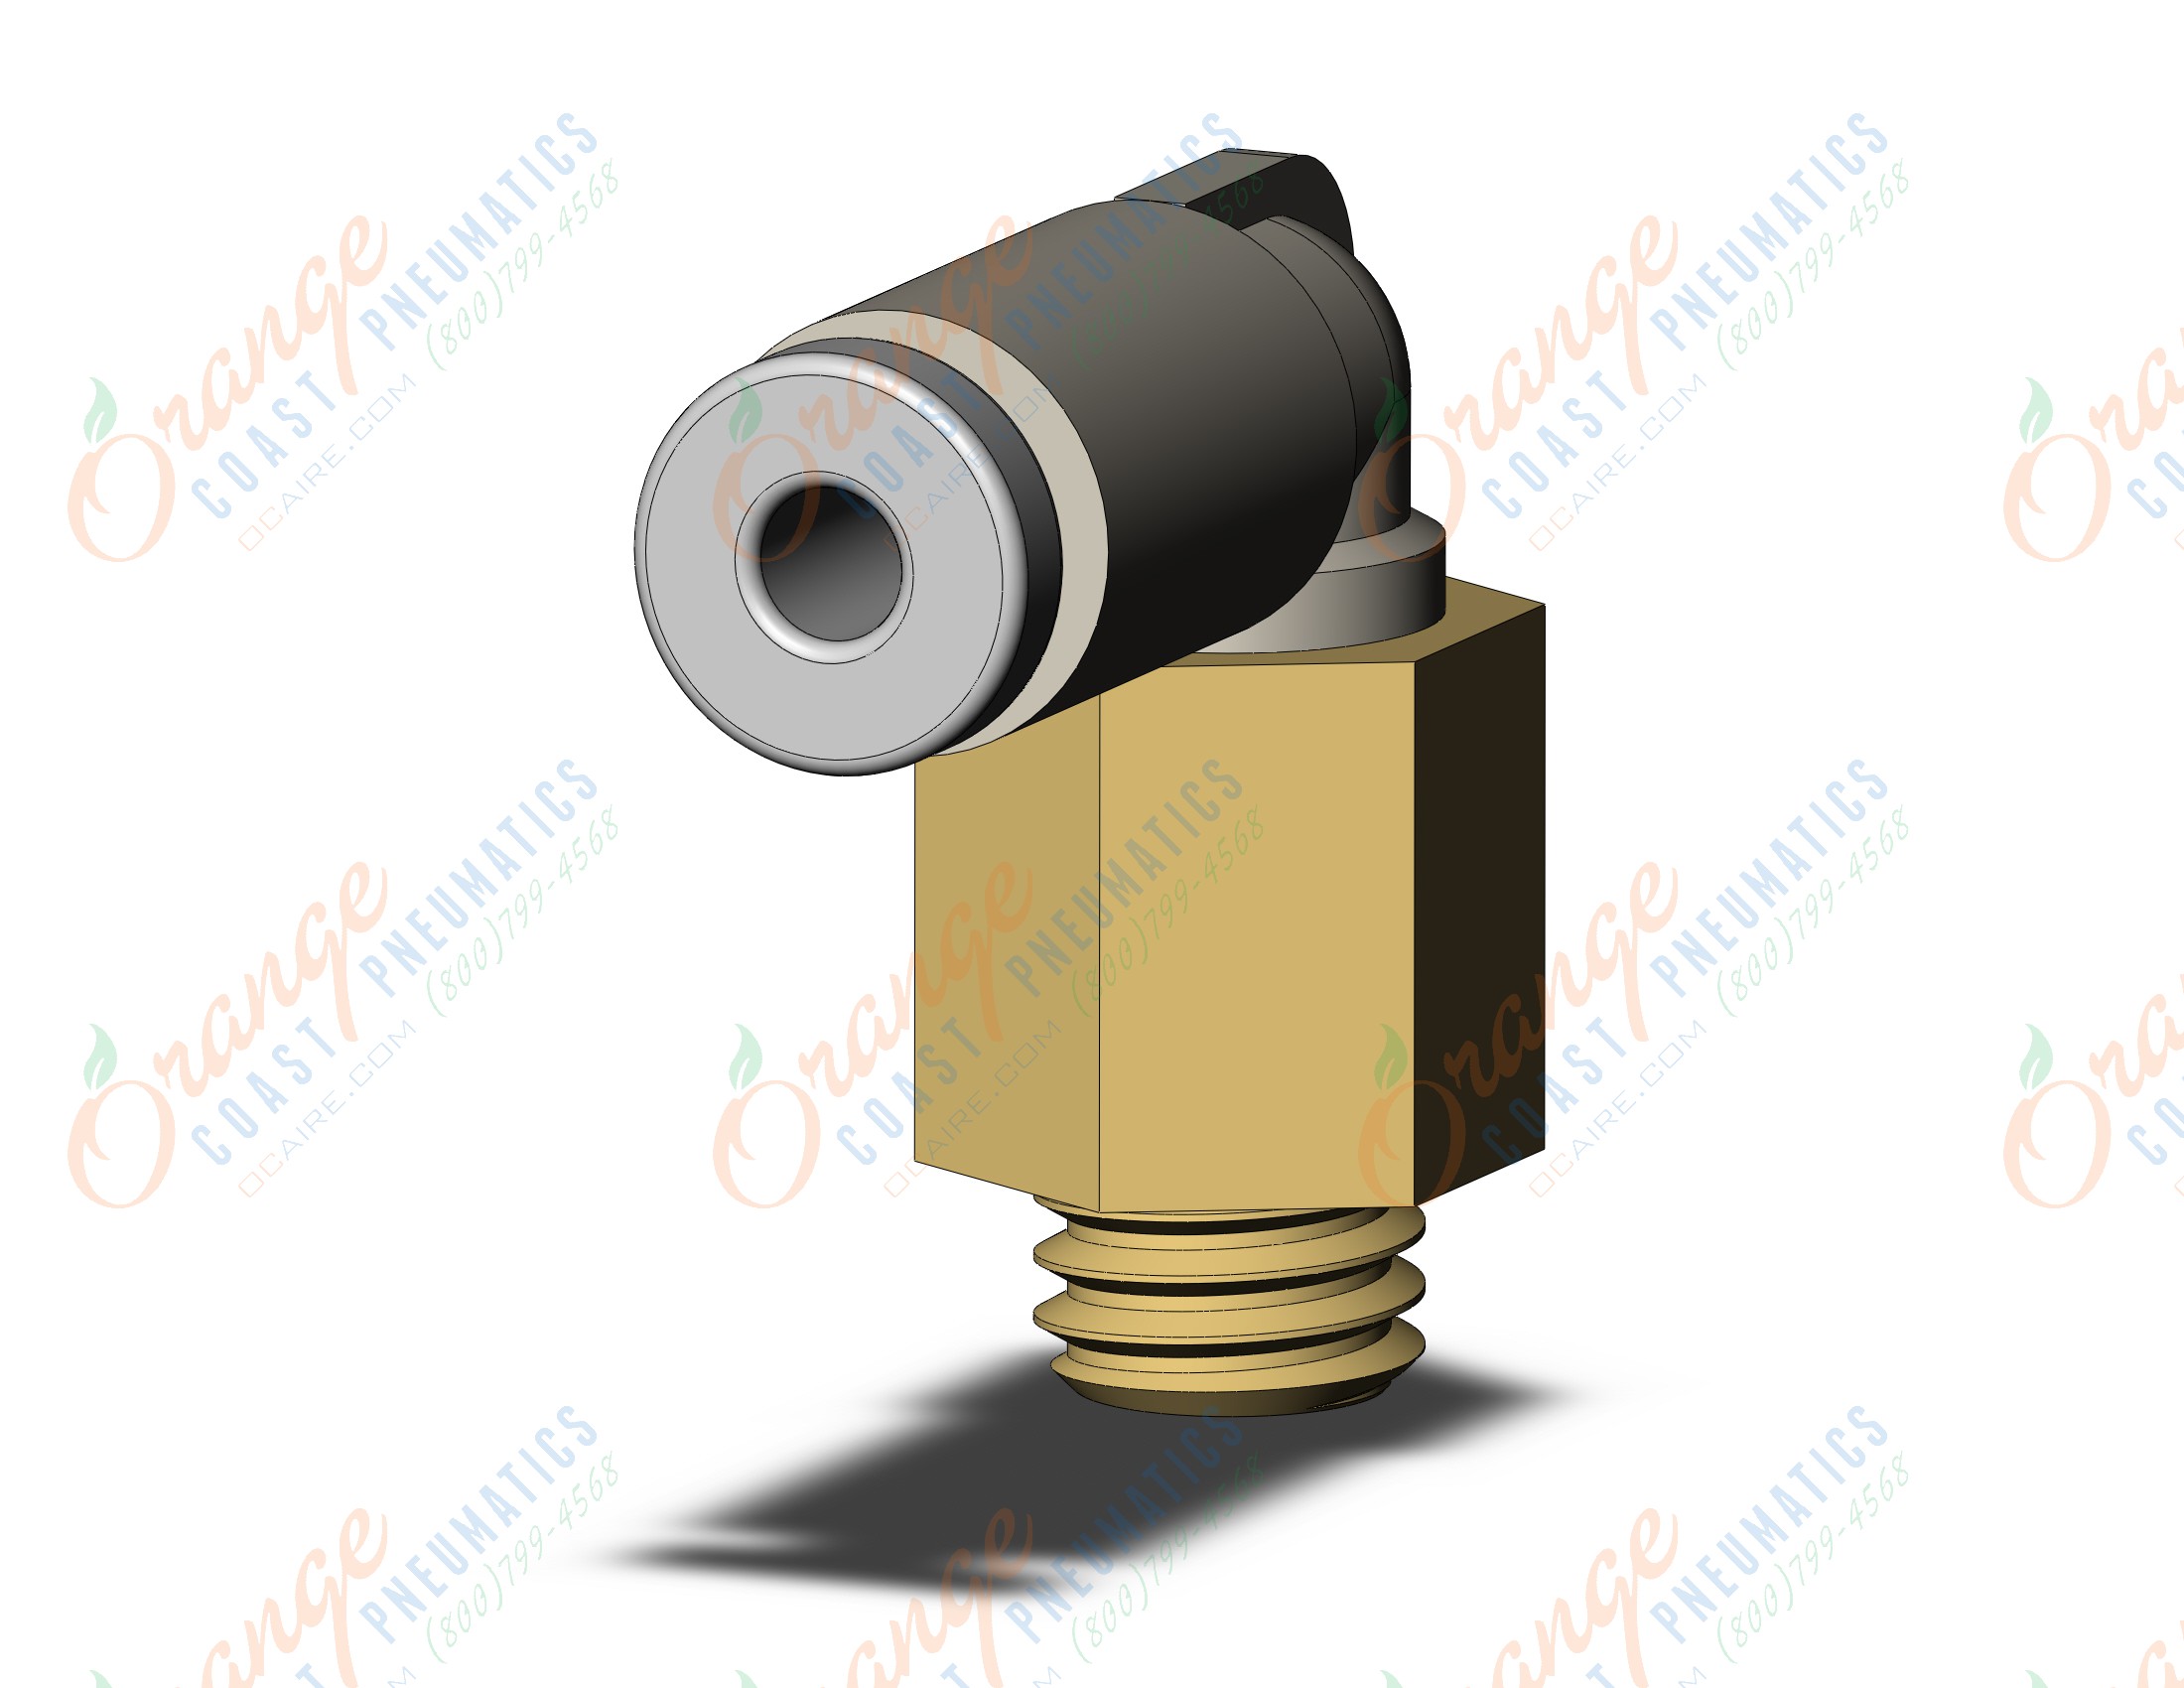 SMC KQ2L02-M5A fitting, male elbow, KQ2 FITTING (sold in packages of 10; price is per piece)